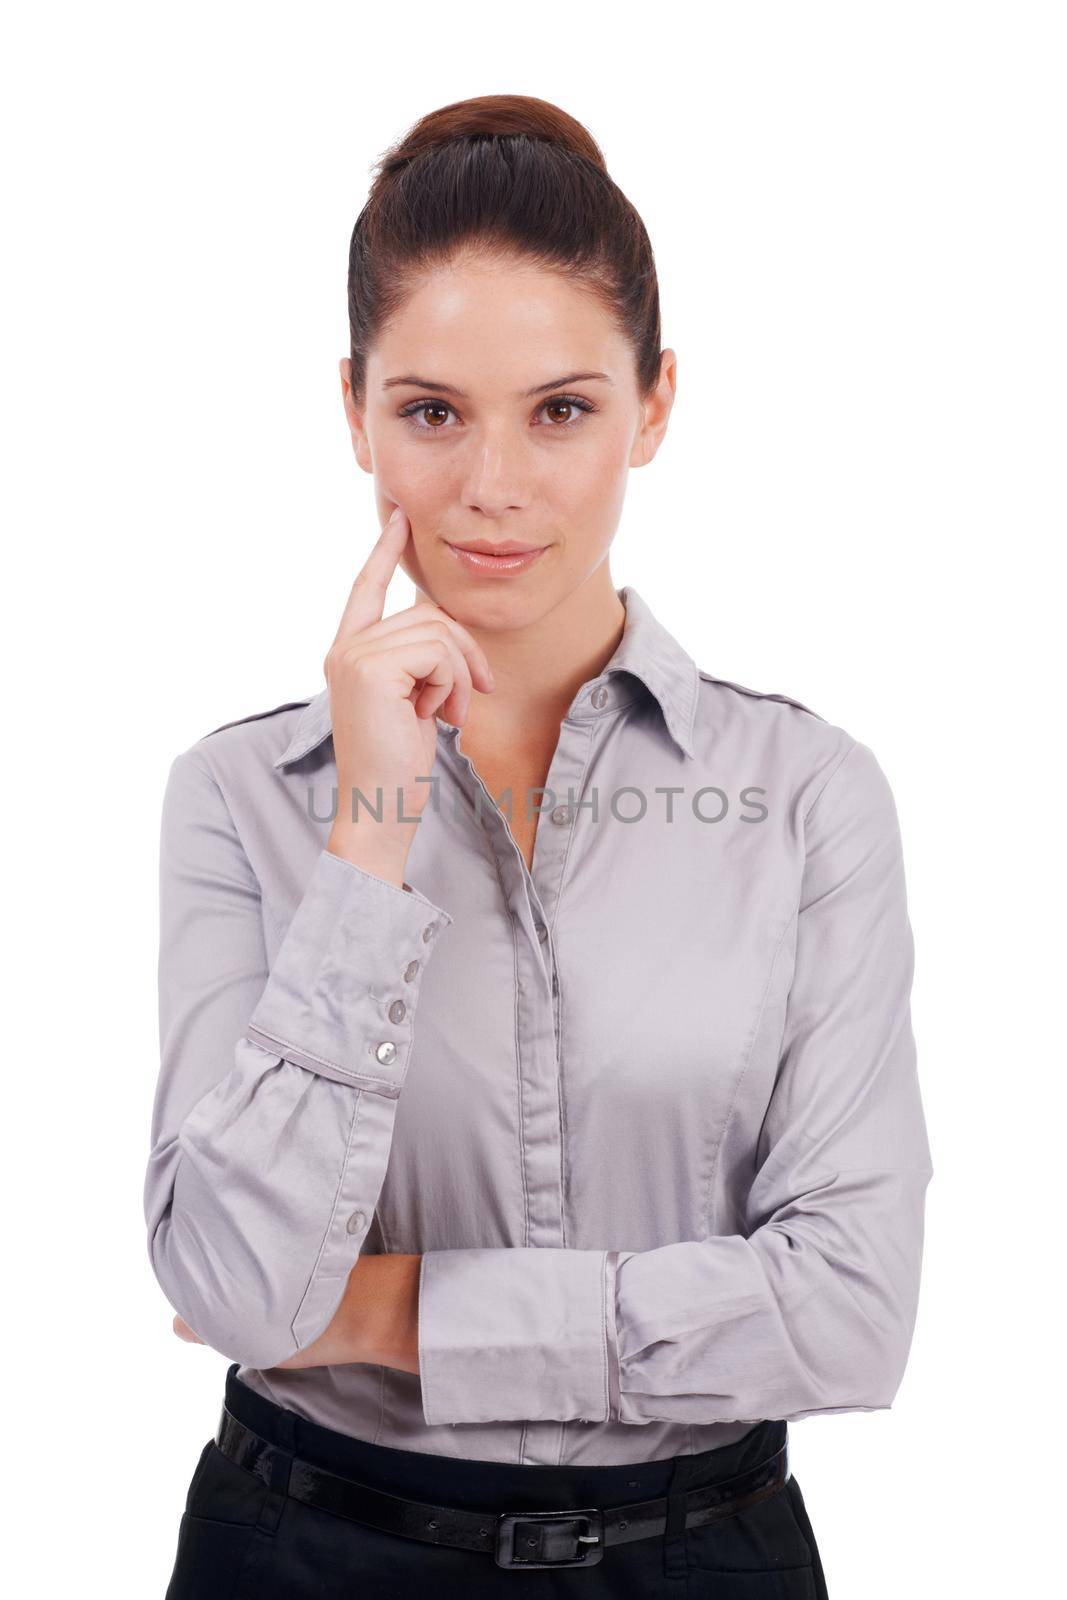 Thinking of her next move up the corporate ladder. Studio portrait of a young business woman with her hand on her chin isolated on white